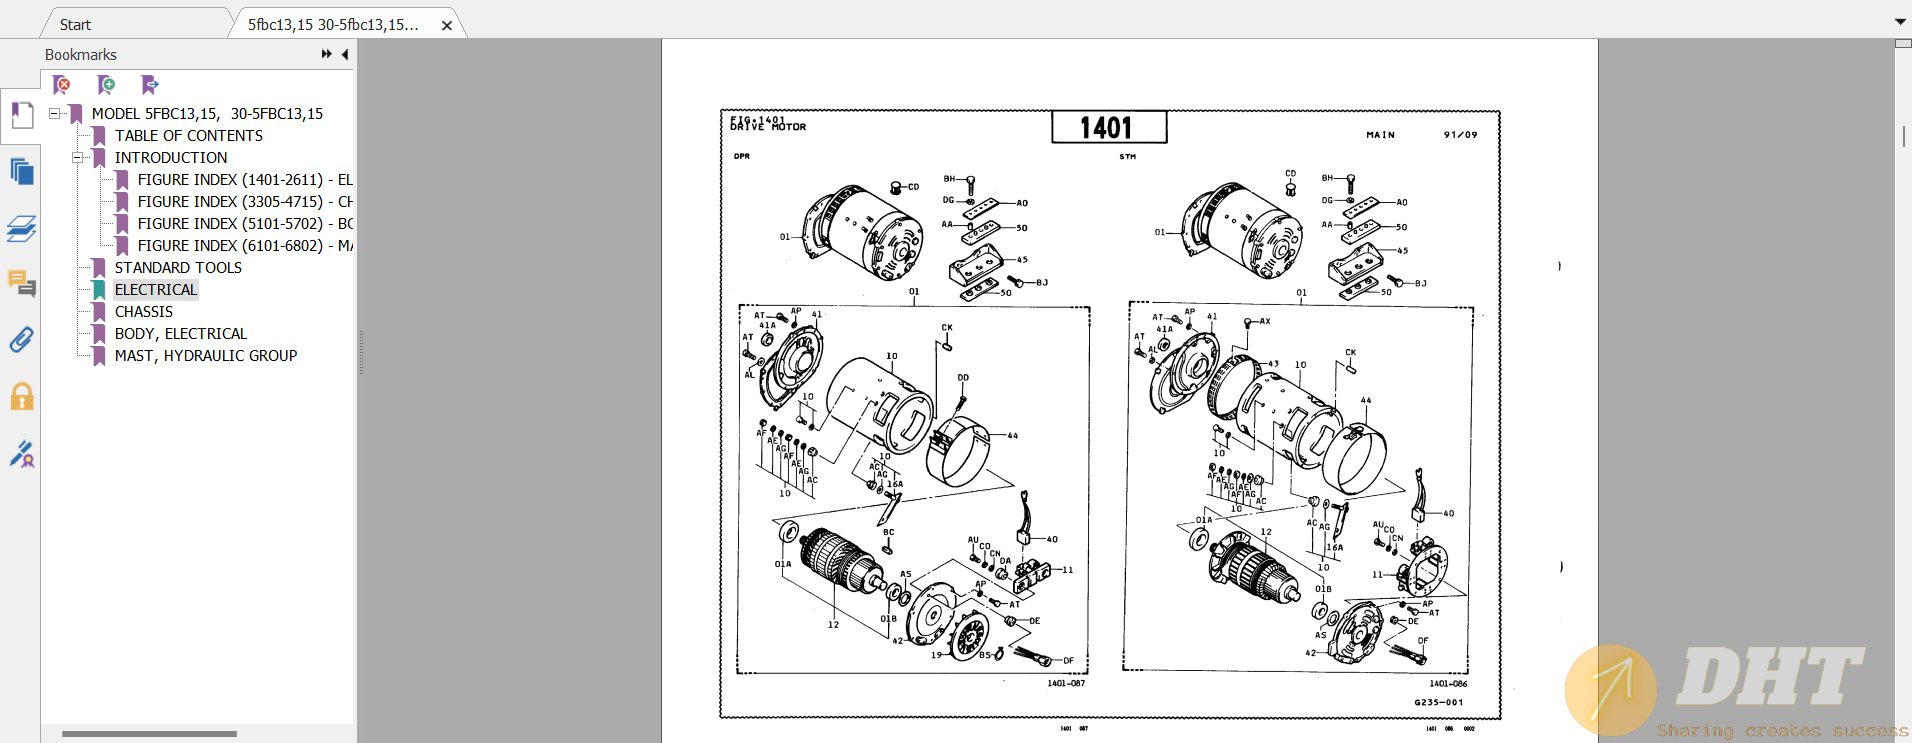 Toyota Forklift workshop manual  and Space Part Catalog-8.png